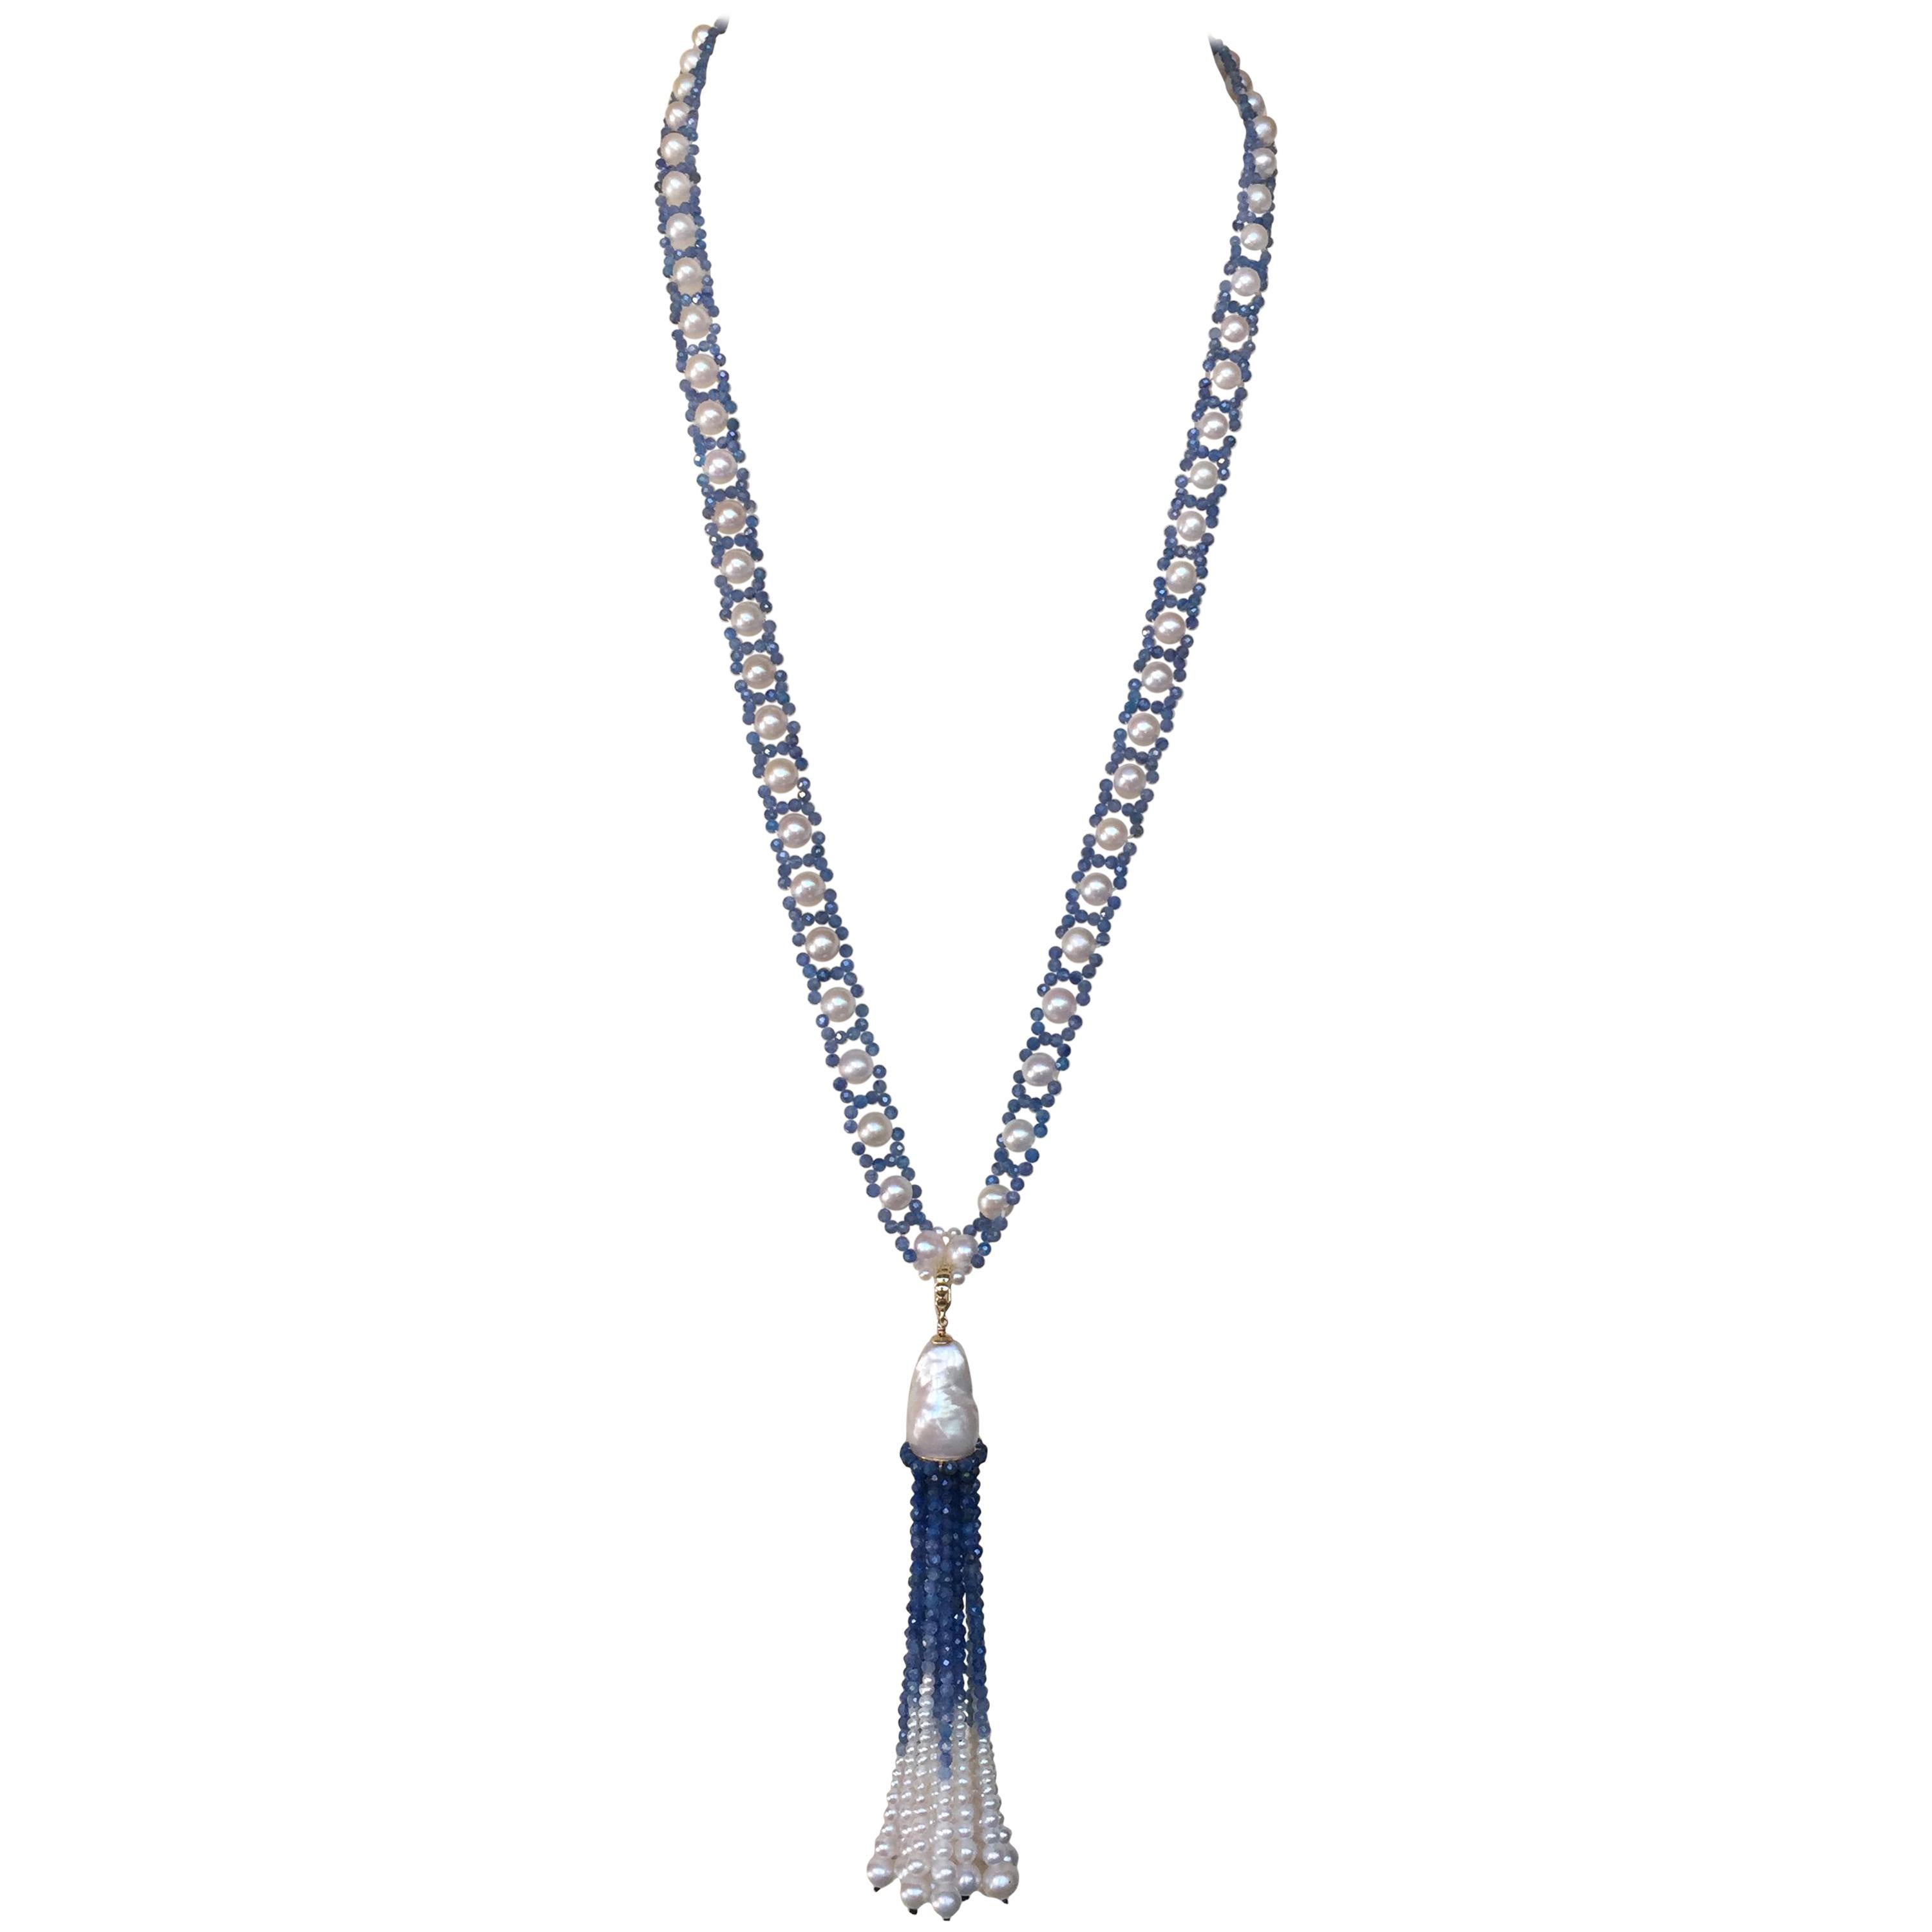 Marina J White Pearl and Kyanite Sautoir Necklace with Tassel and 14 K Gold Clip